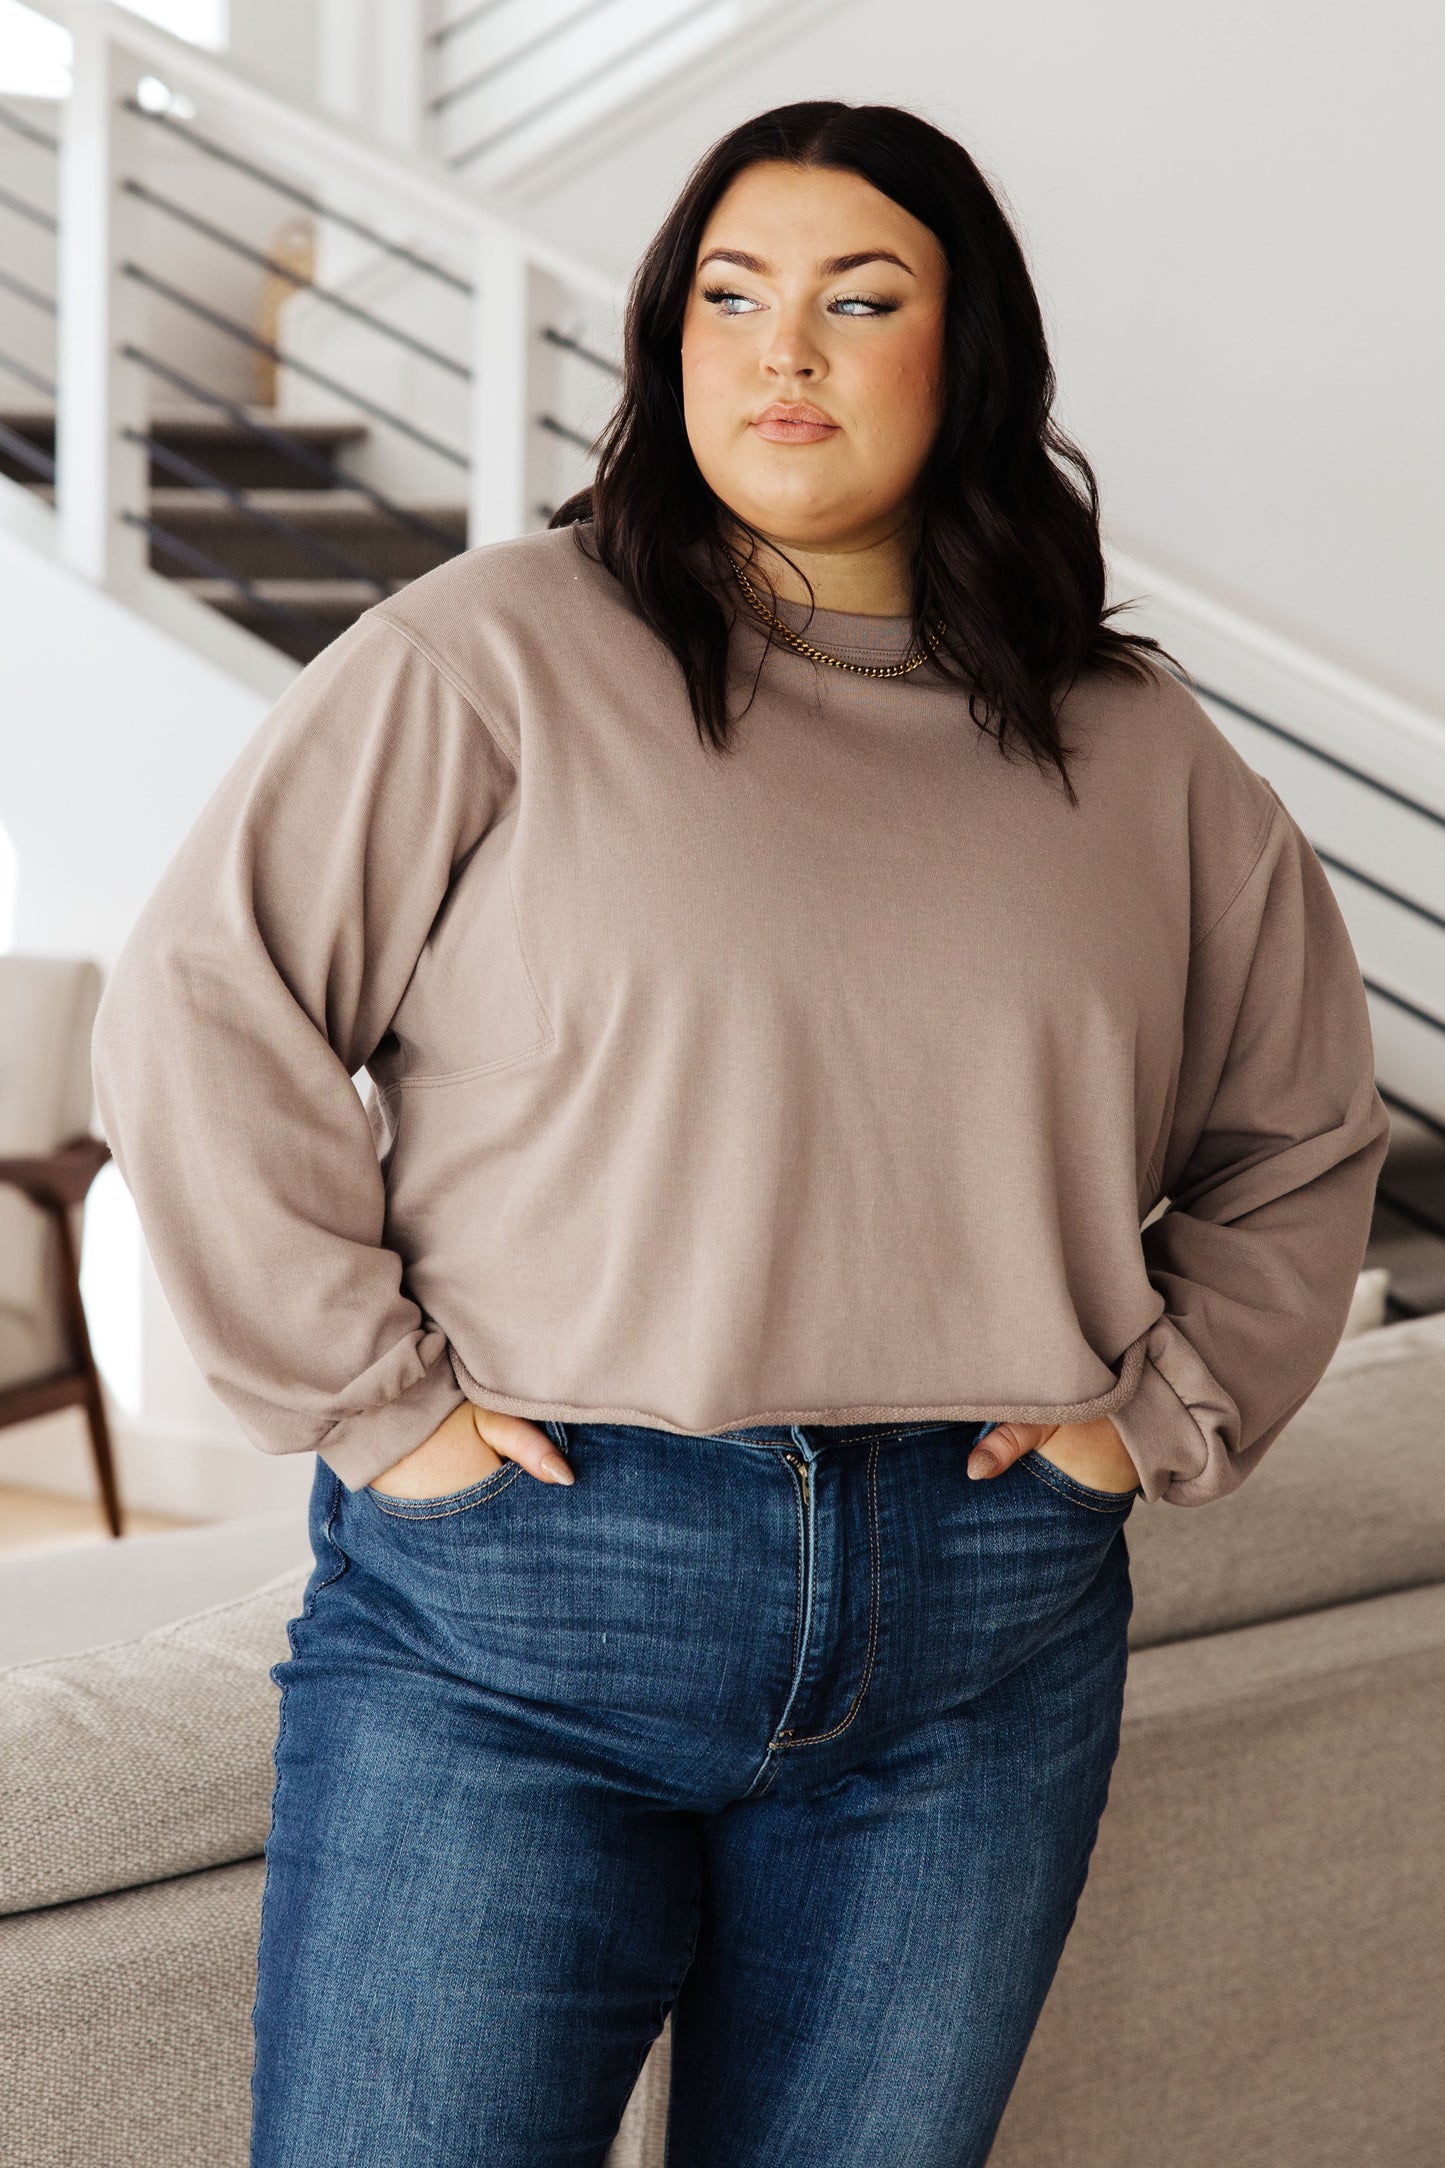 The Lounge A Lot Cut Off Sweatshirt is the perfect piece for weekend lounging. Crafted from lightweight french terry, it's designed with a crew neck, dropped shoulder, and a relaxed fit. The cut off hem allows for maximum comfort, while the matching pants provide the perfect lounge fit. S - XL